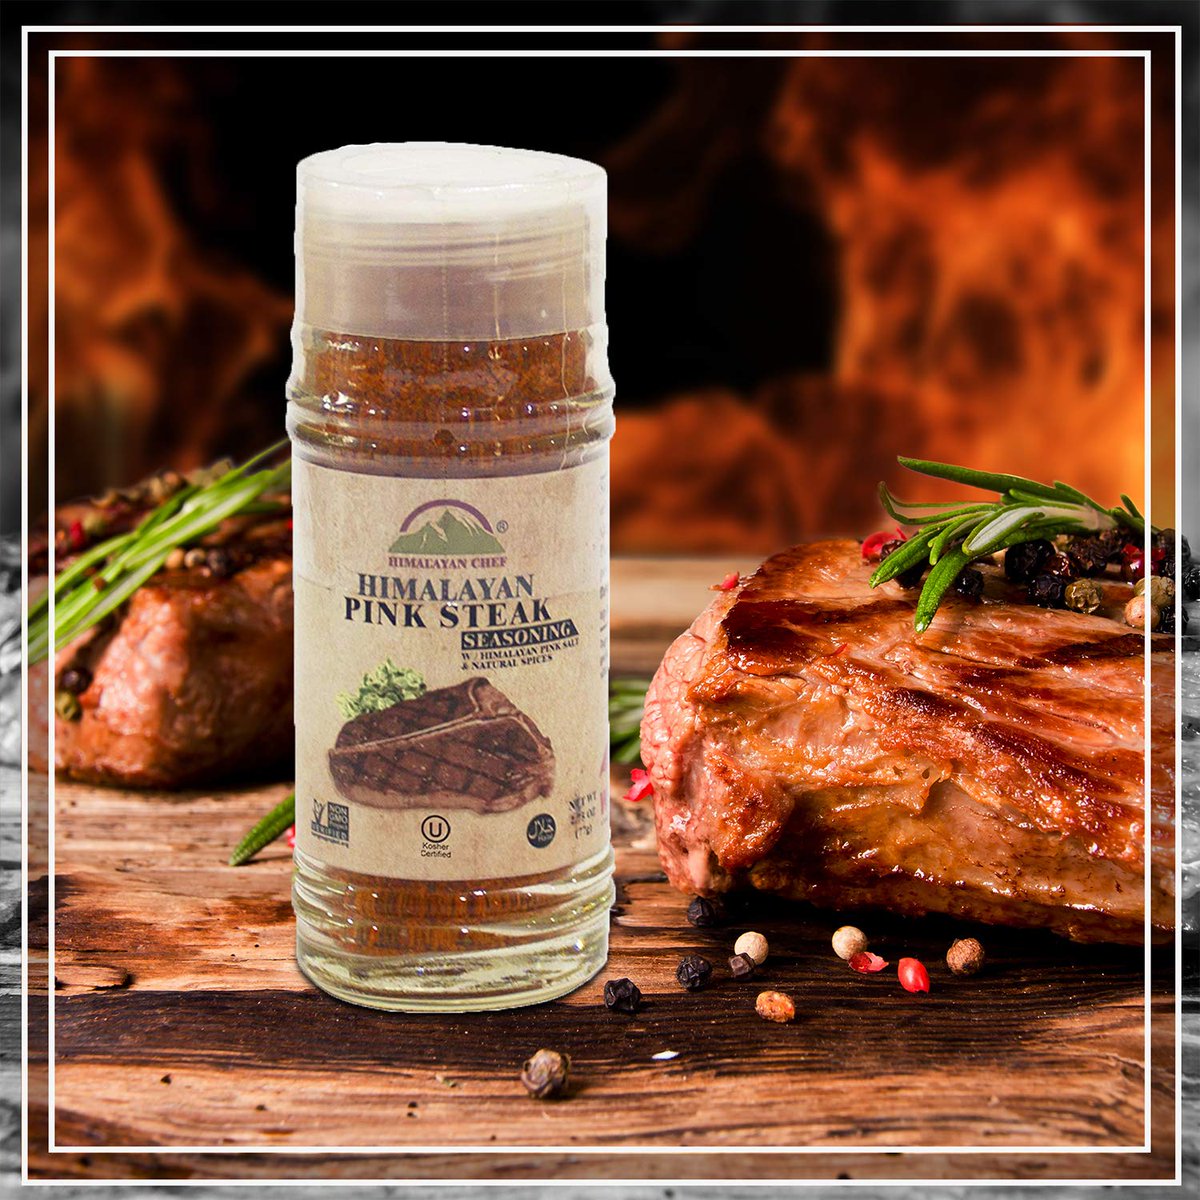 #HimalayanChef Steak Seasoning with #PinkSalt & Natural Spices.
#CustomerReview
The BEST #STEAKSEASONING EVER. Makes the #steak tender, juicy, and VERY flavorful...
amzn.to/3gIqtOu
#himalayanchefseasoning #pinksaltseasoning #saltsteakseasoning #wbm #naturalspices